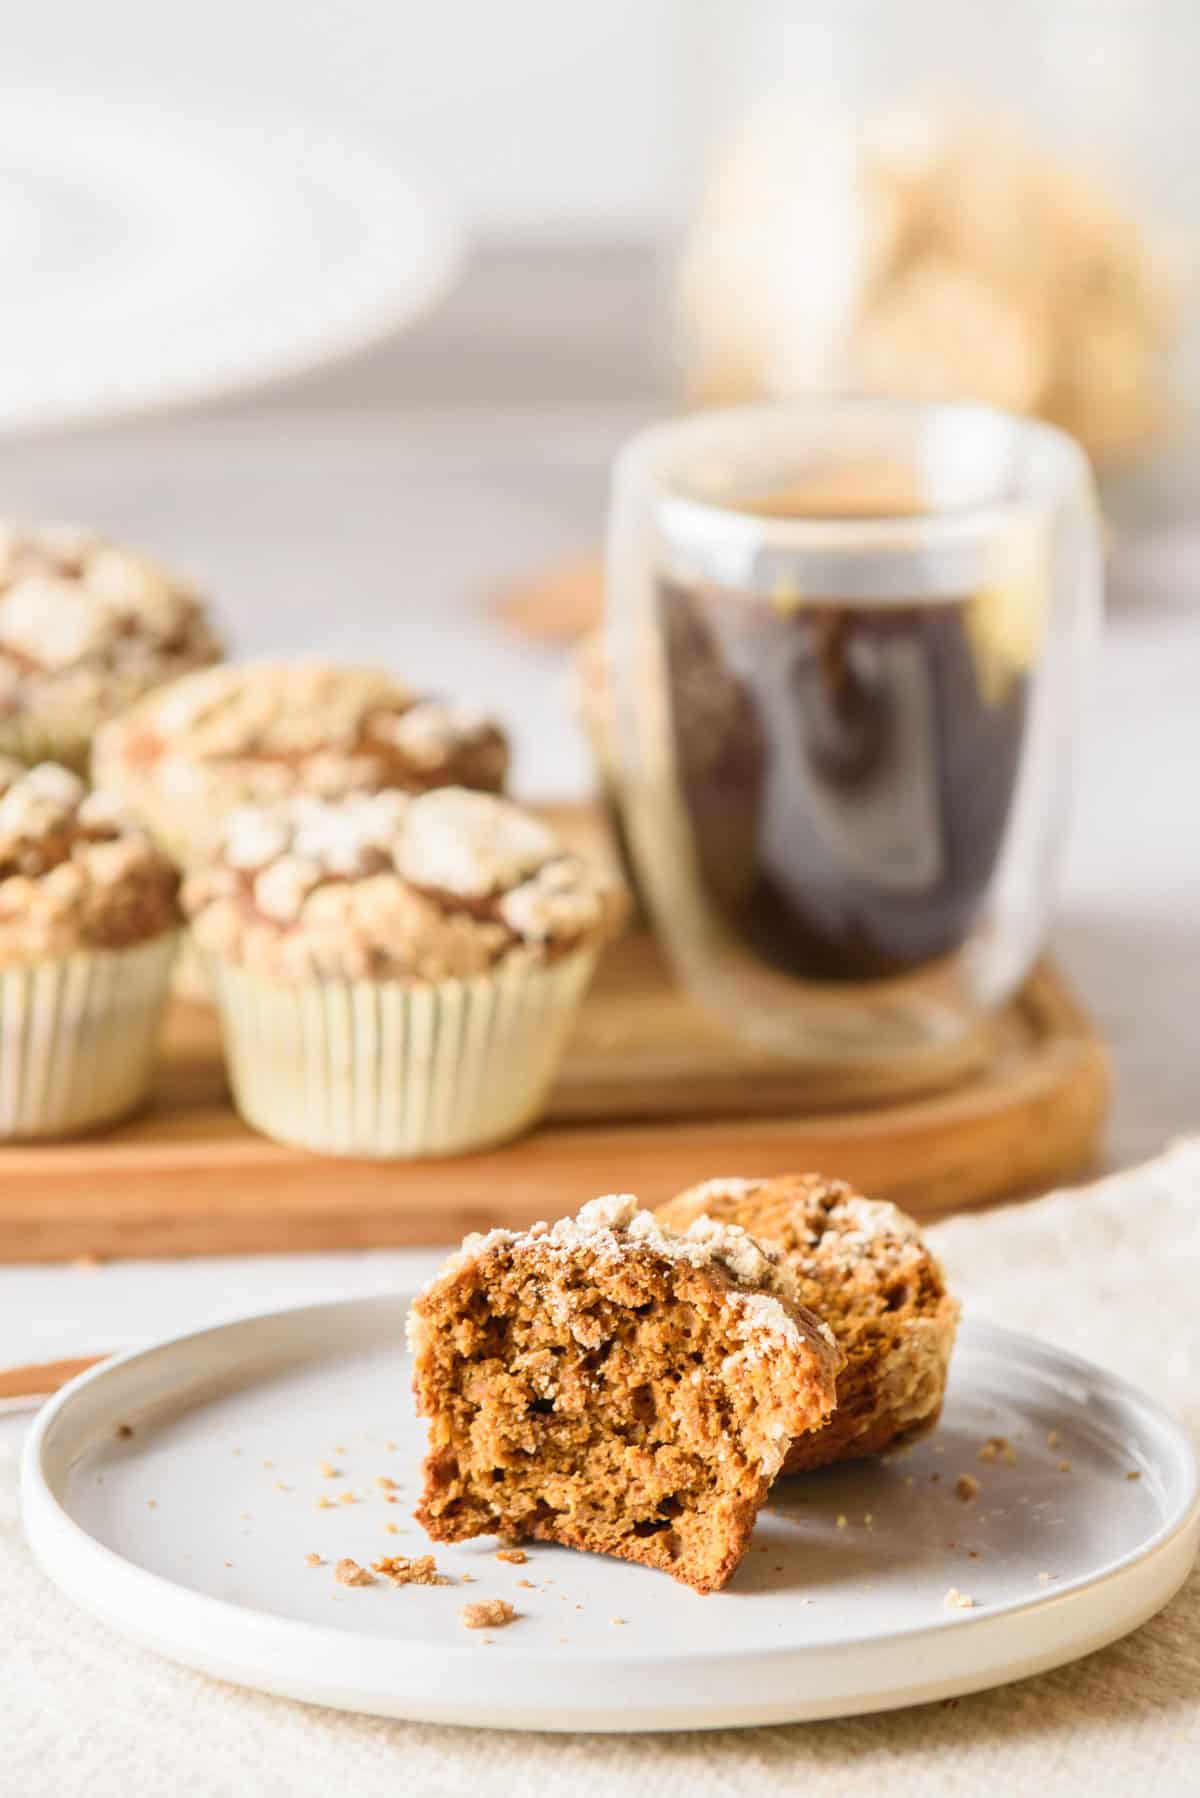 Pumpkin streusel muffin sliced in half, placed on a white plate, with a wooden platter of pumpkin muffins and coffee in the background.